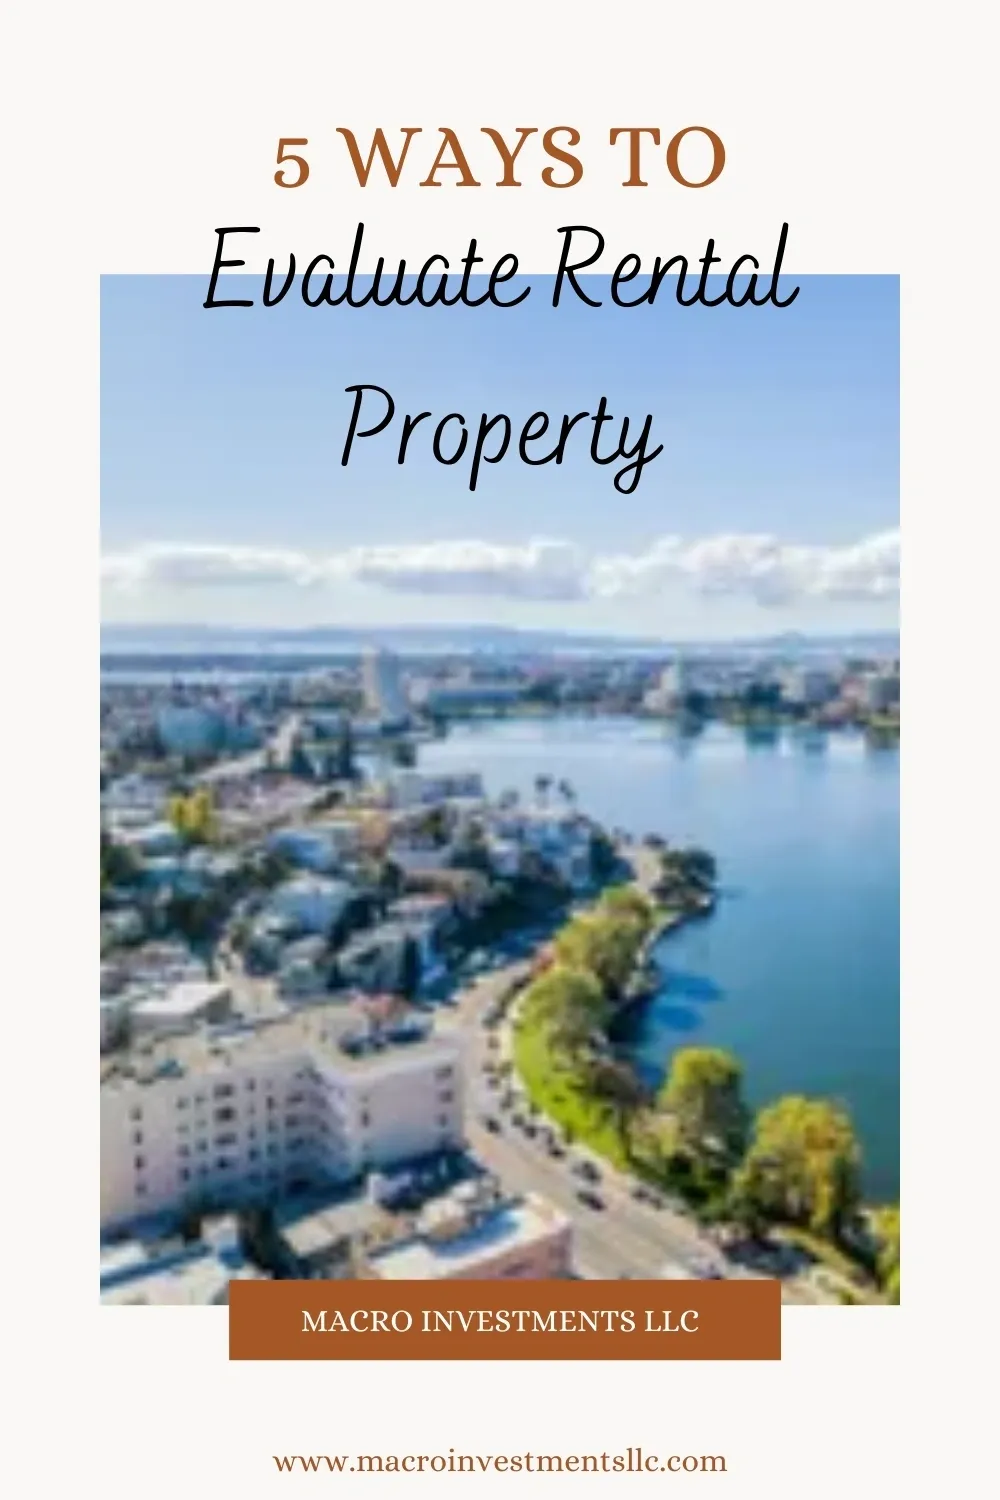 Learn 5 Ways to Evaluate Rental Property Investments | Blog | InvestingTE.com